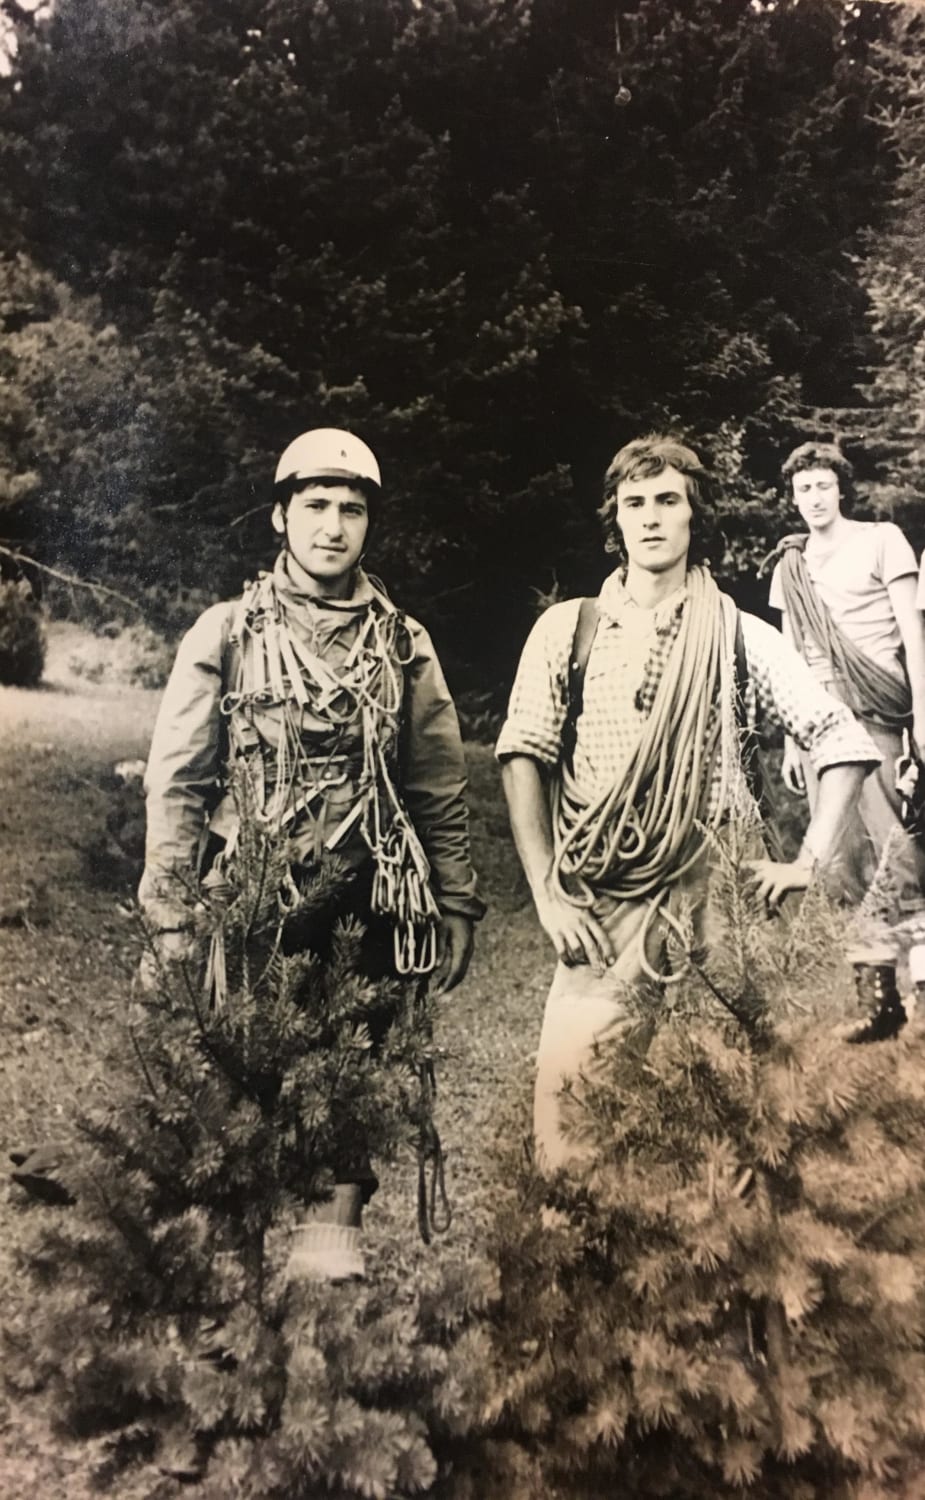 Found this cool old photo of my dad (left) and thought I’d share it here. He is the person that introduced me to skiing, rock climbing, and hiking and I’m so happy he showed me this exciting world of adventure.